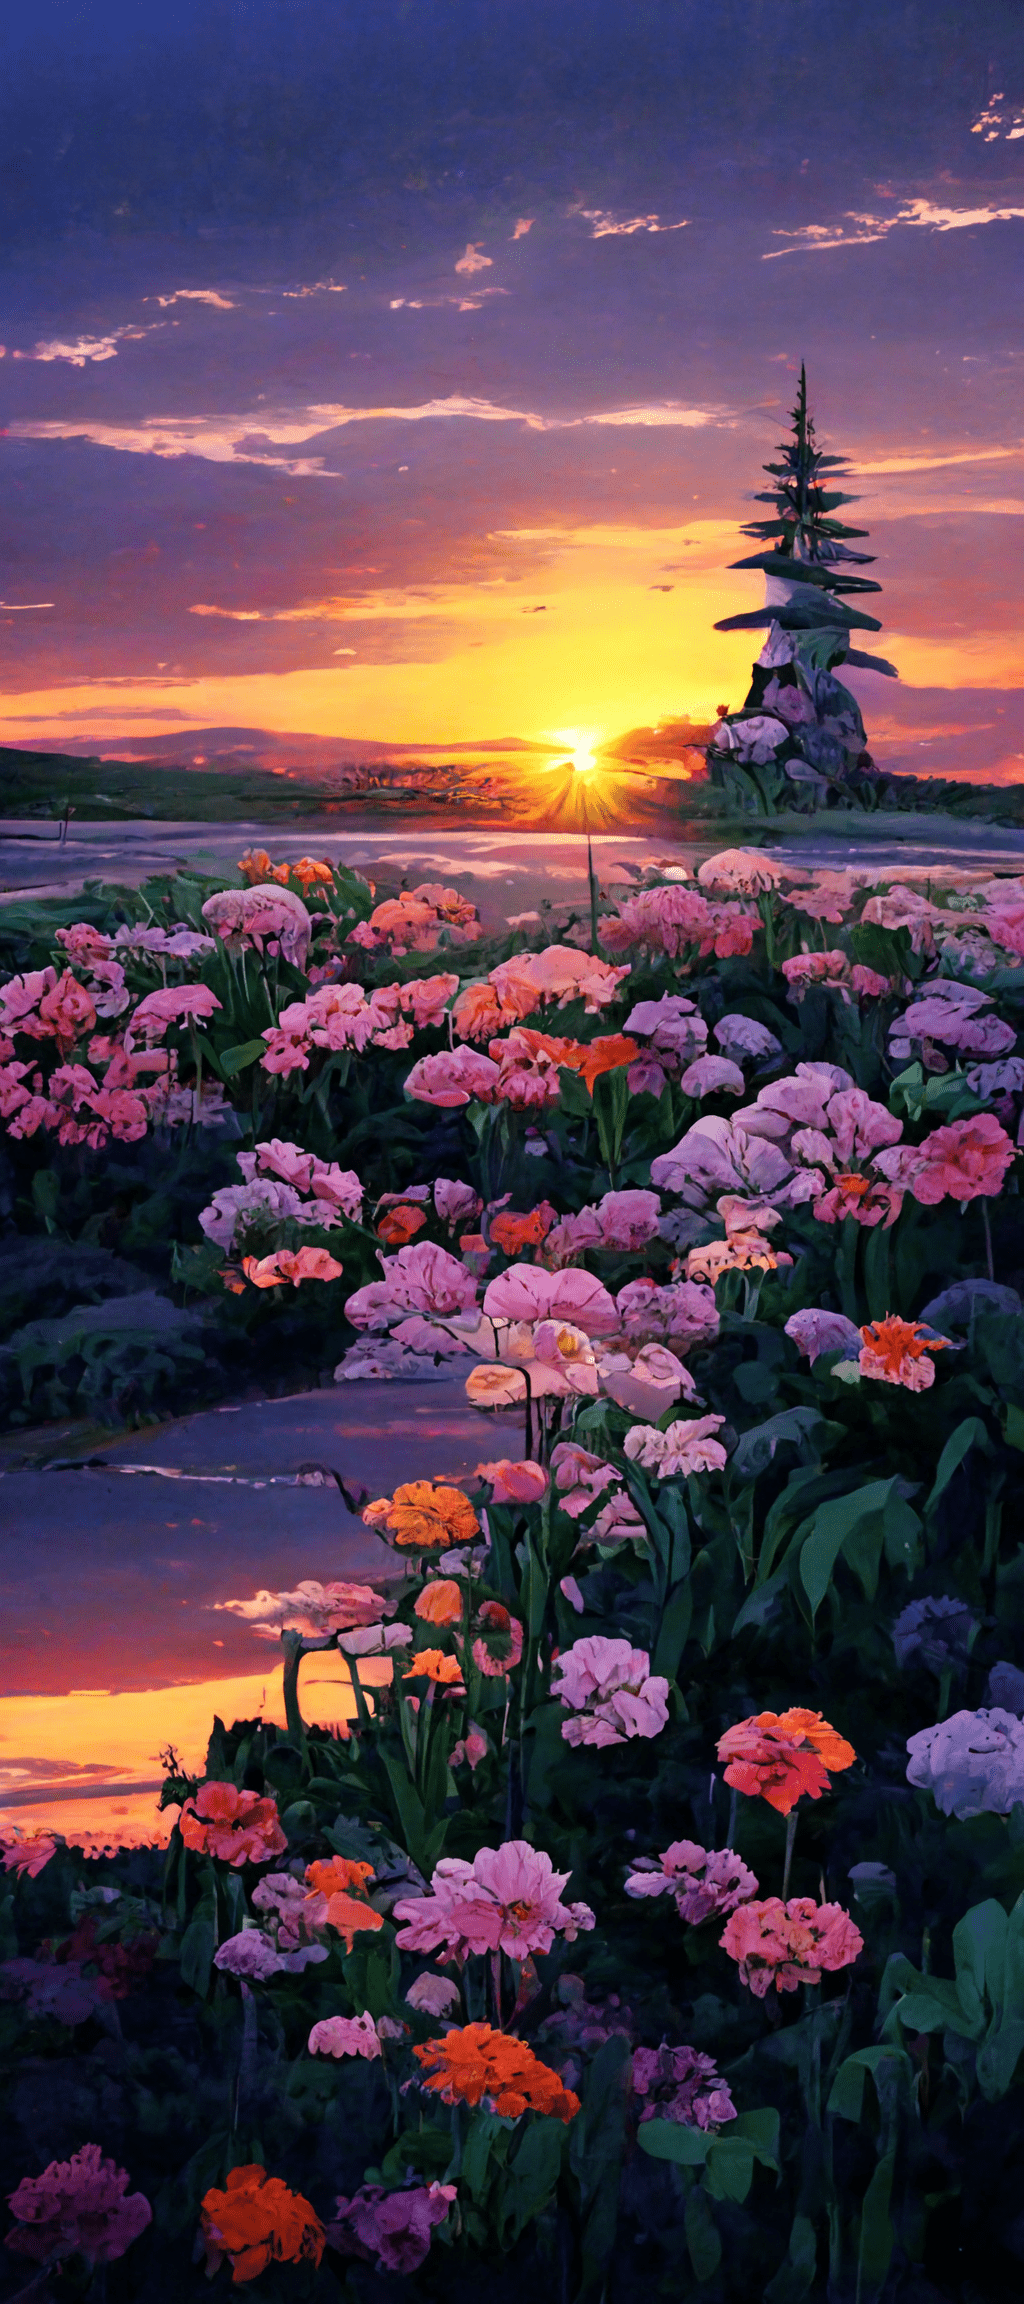 A painting of flowers and water at sunset - 90s anime